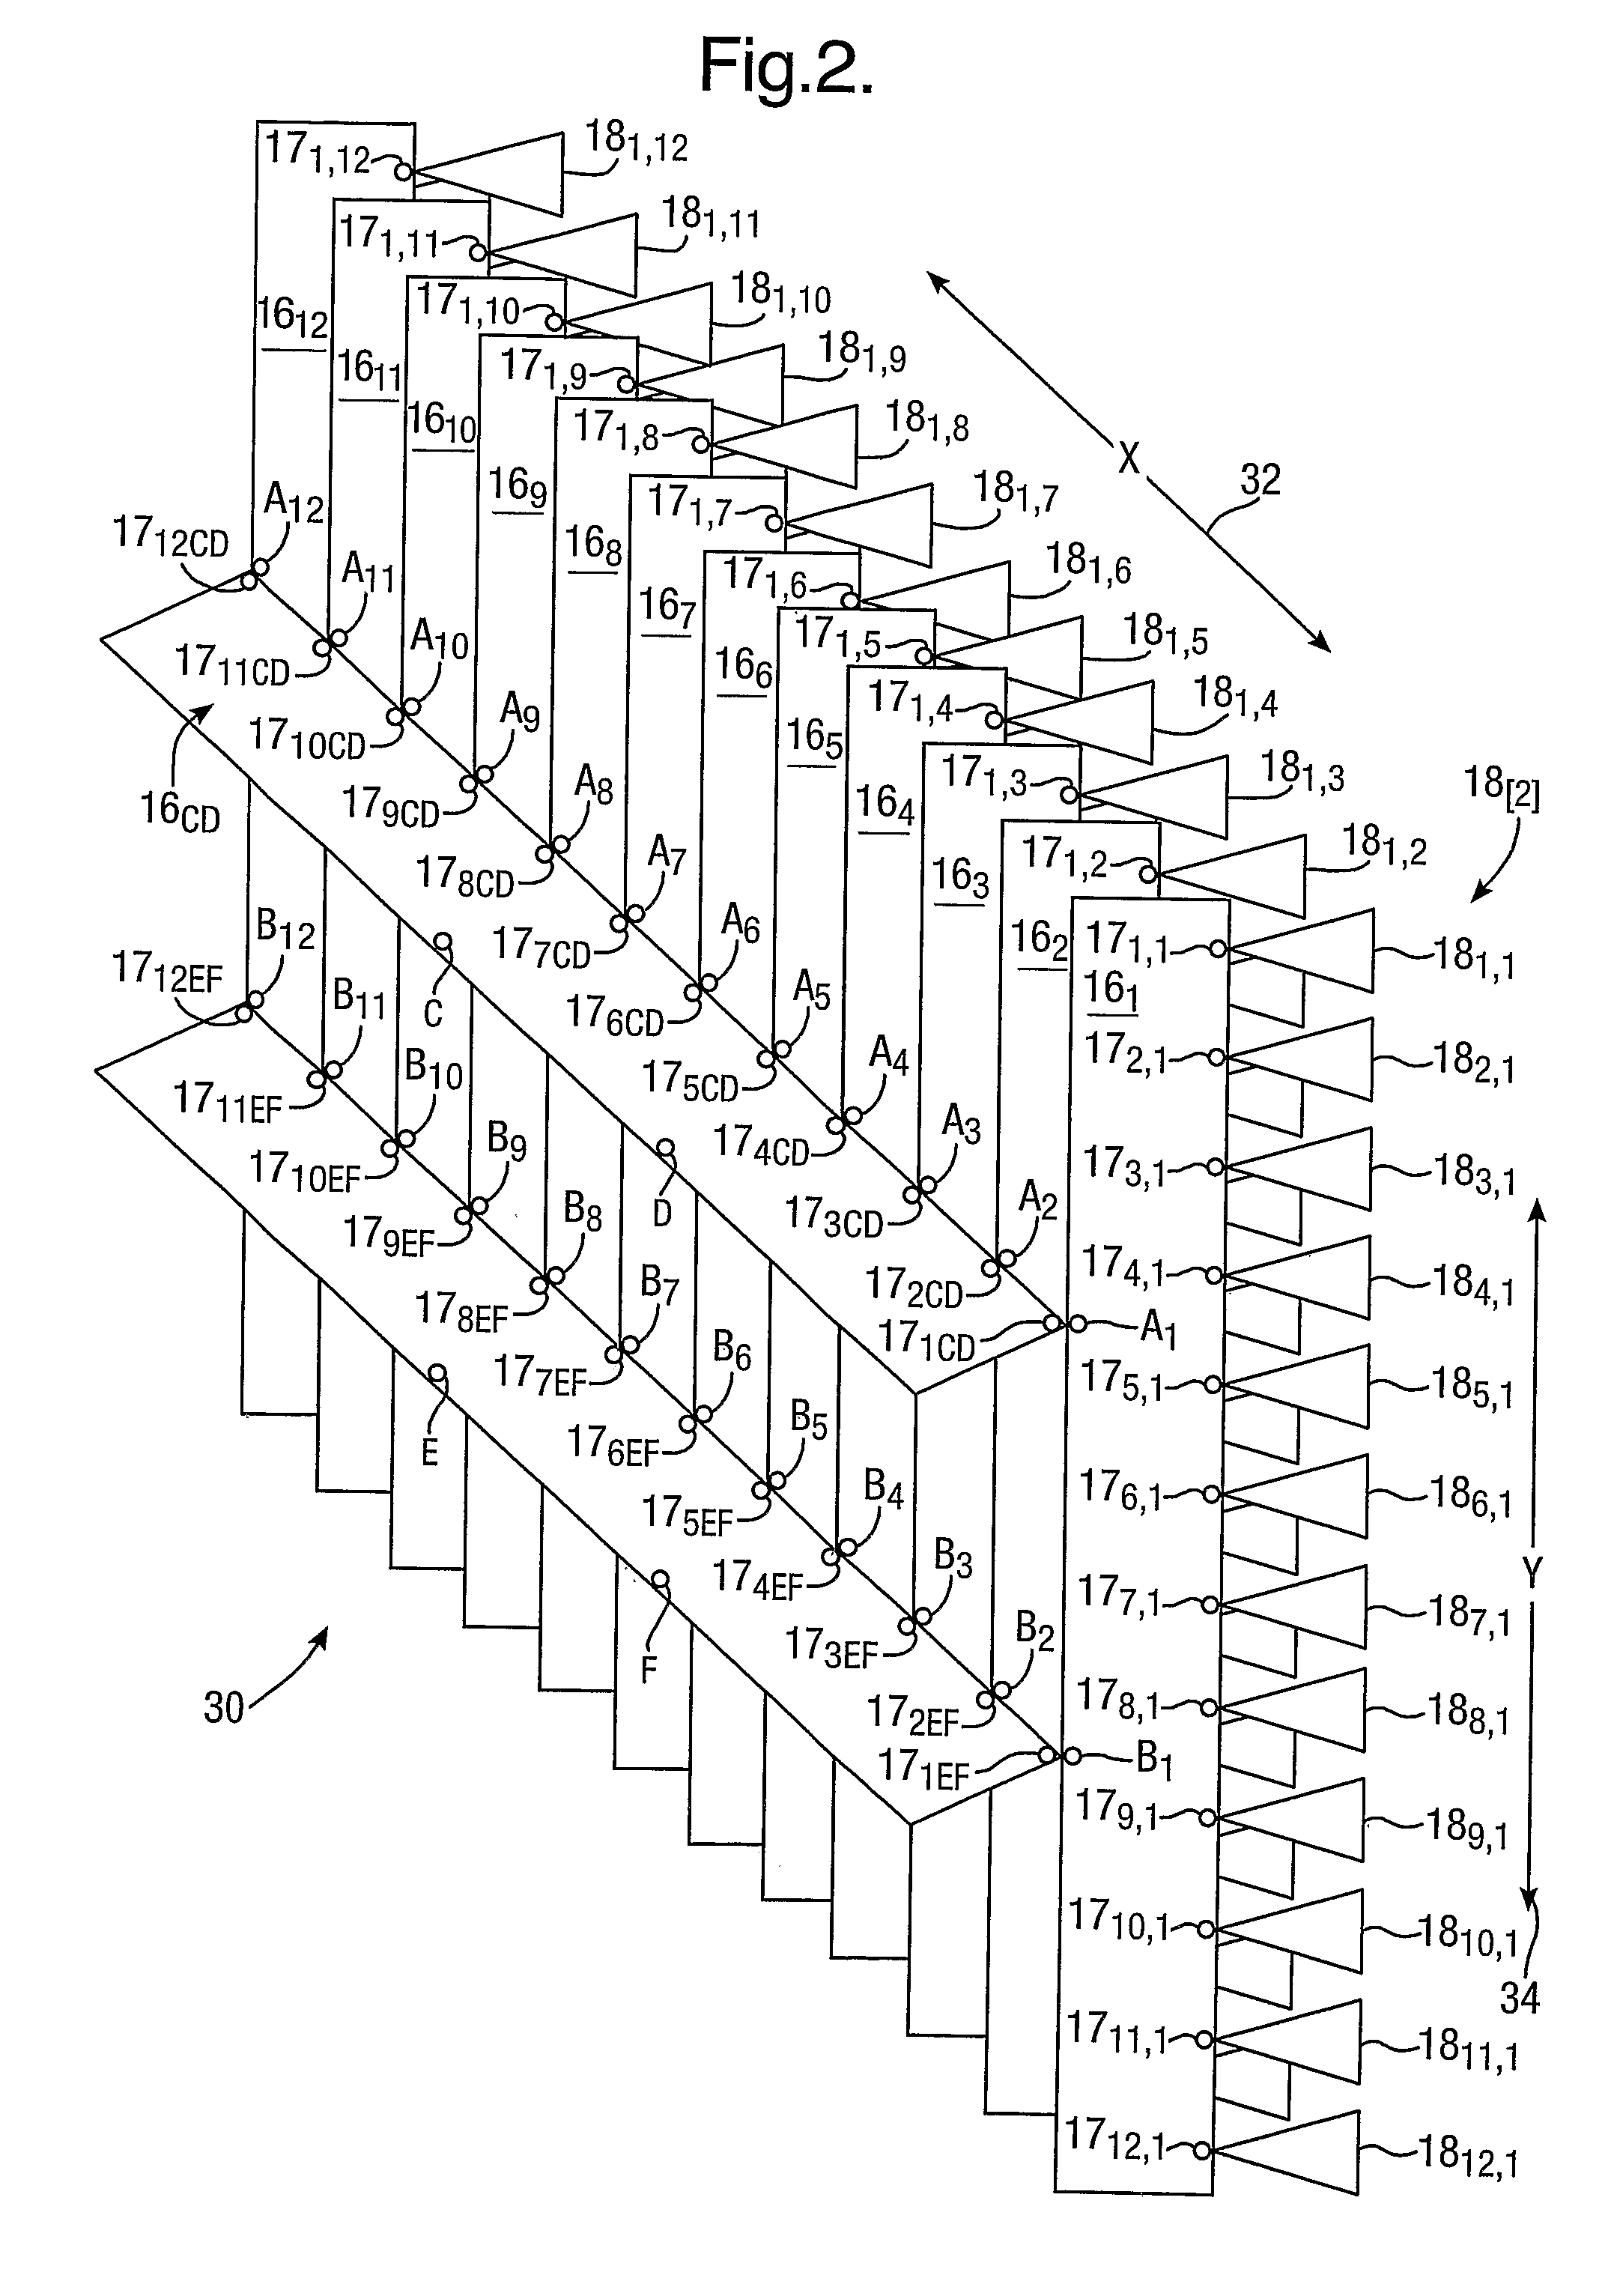 Phased array antenna system with two dimensional scanning